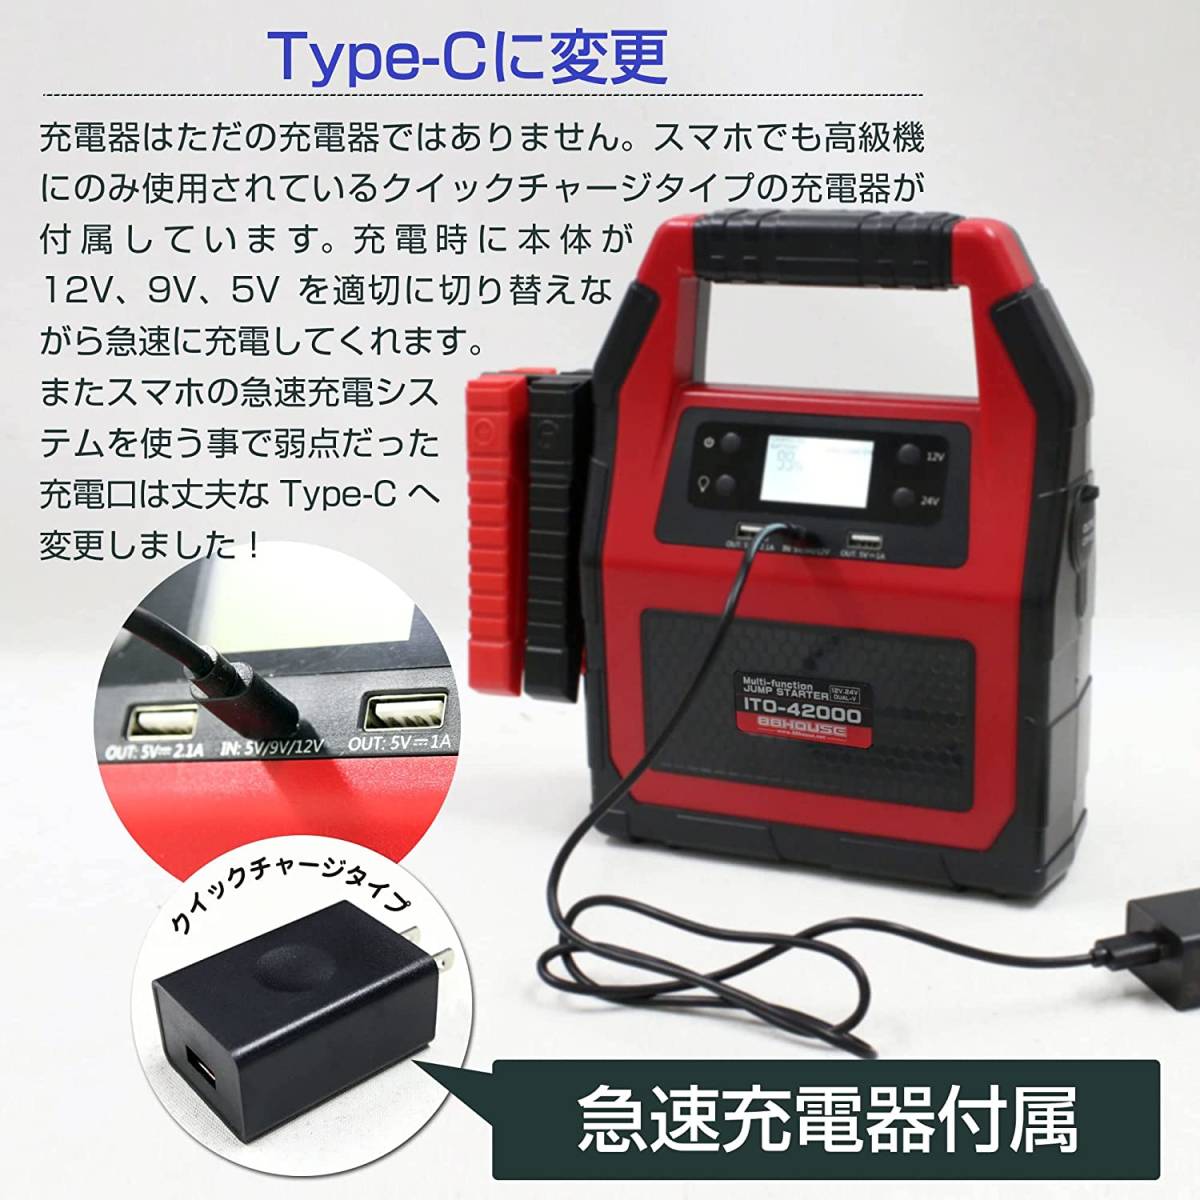 [ new goods ] bee bee house multi function Jump starter ITO-42000 12V 24V high capacity 42000mAh 1500A 88 house newest version 2023 year of model 